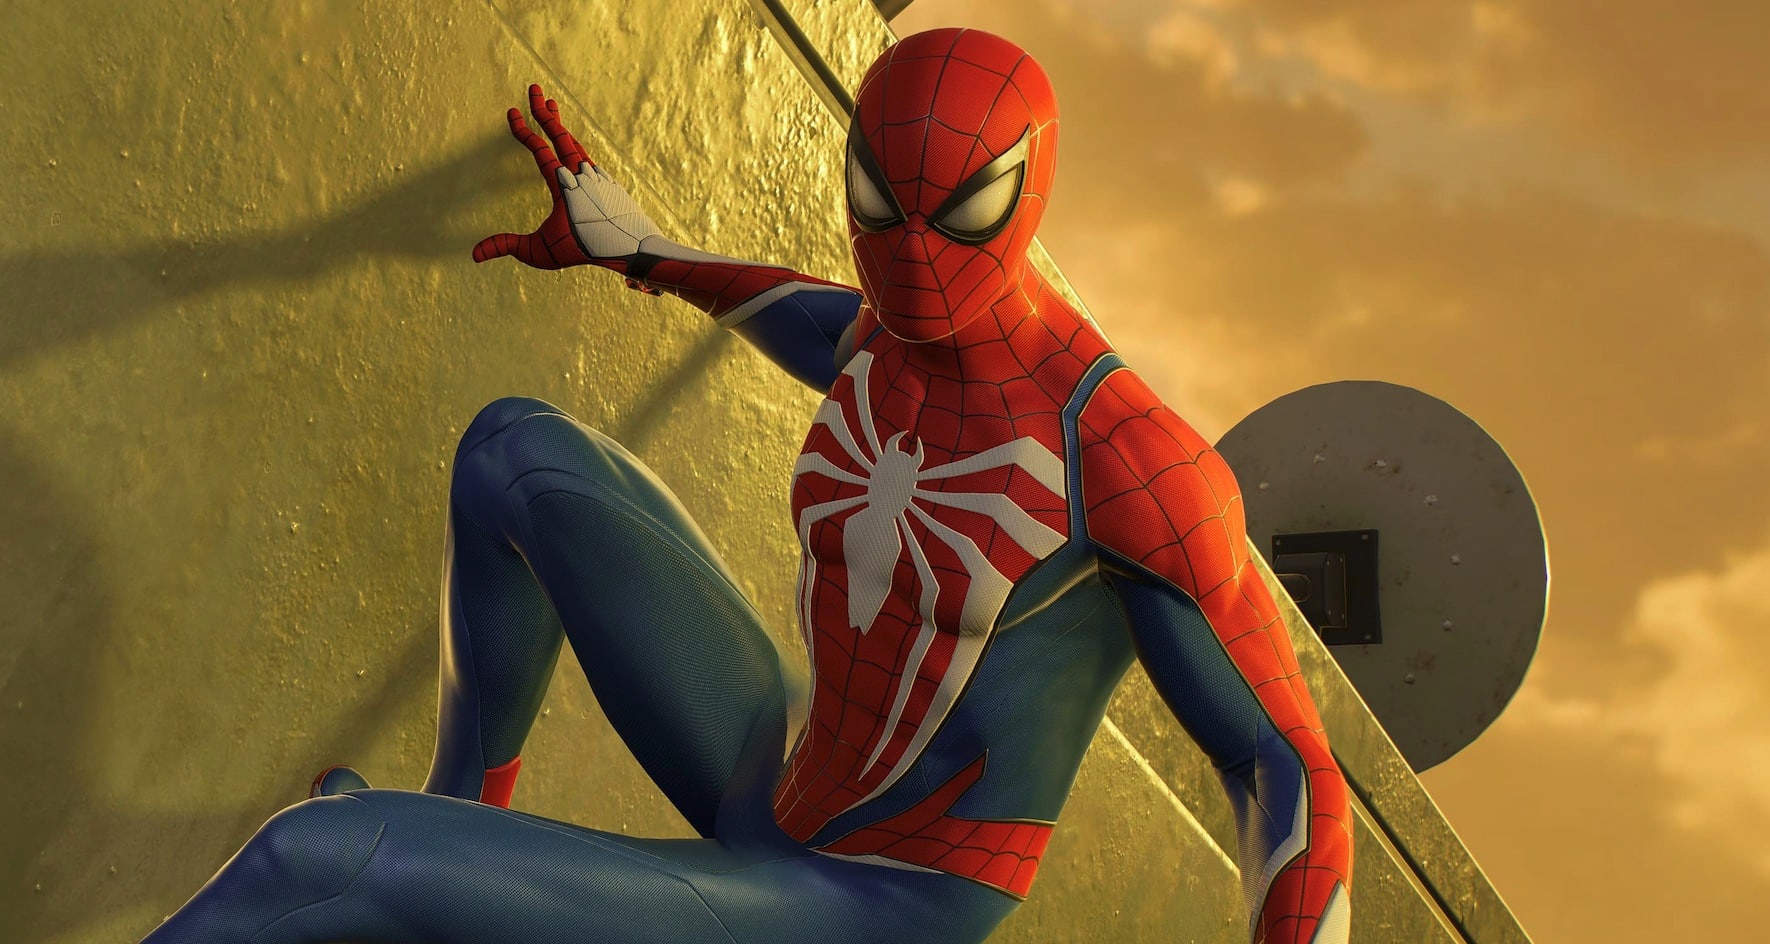 Marvel's Spider-Man 2: the next big leap for PlayStation 5?